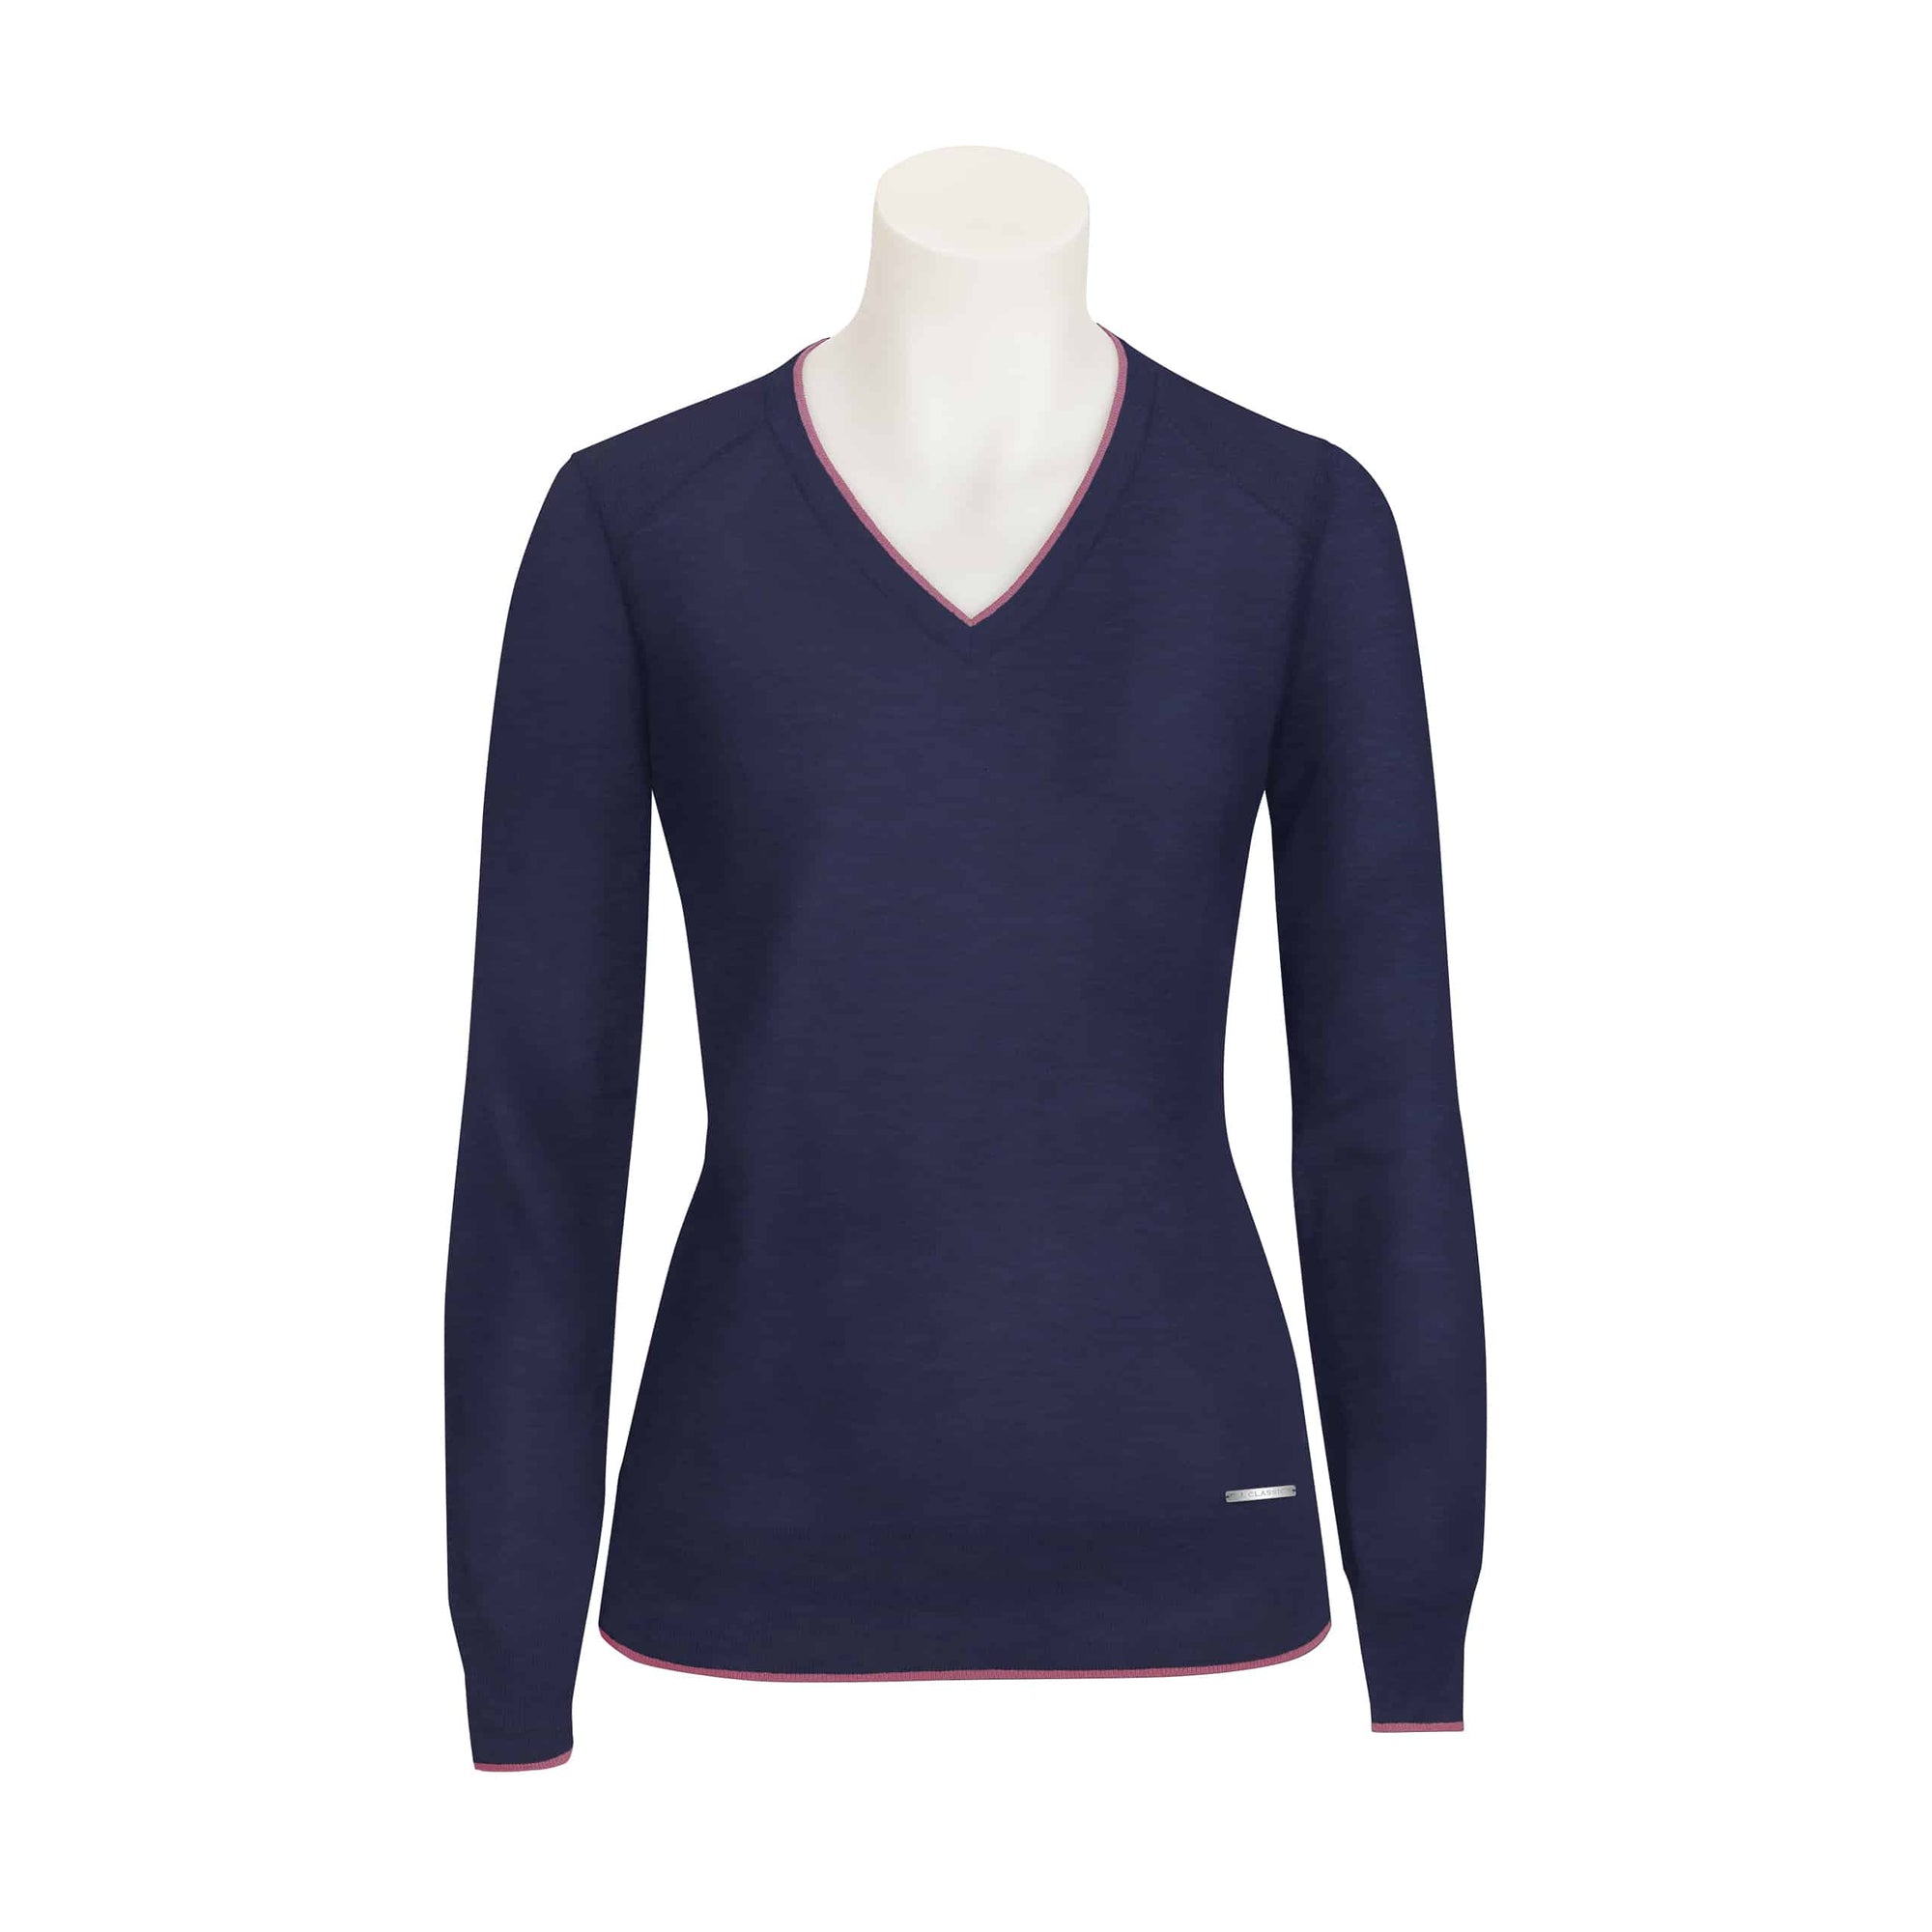 Chestnut Bay Pullover Natalier V Neck Sweater-RJ Classics equestrian team apparel online tack store mobile tack store custom farm apparel custom show stable clothing equestrian lifestyle horse show clothing riding clothes horses equestrian tack store